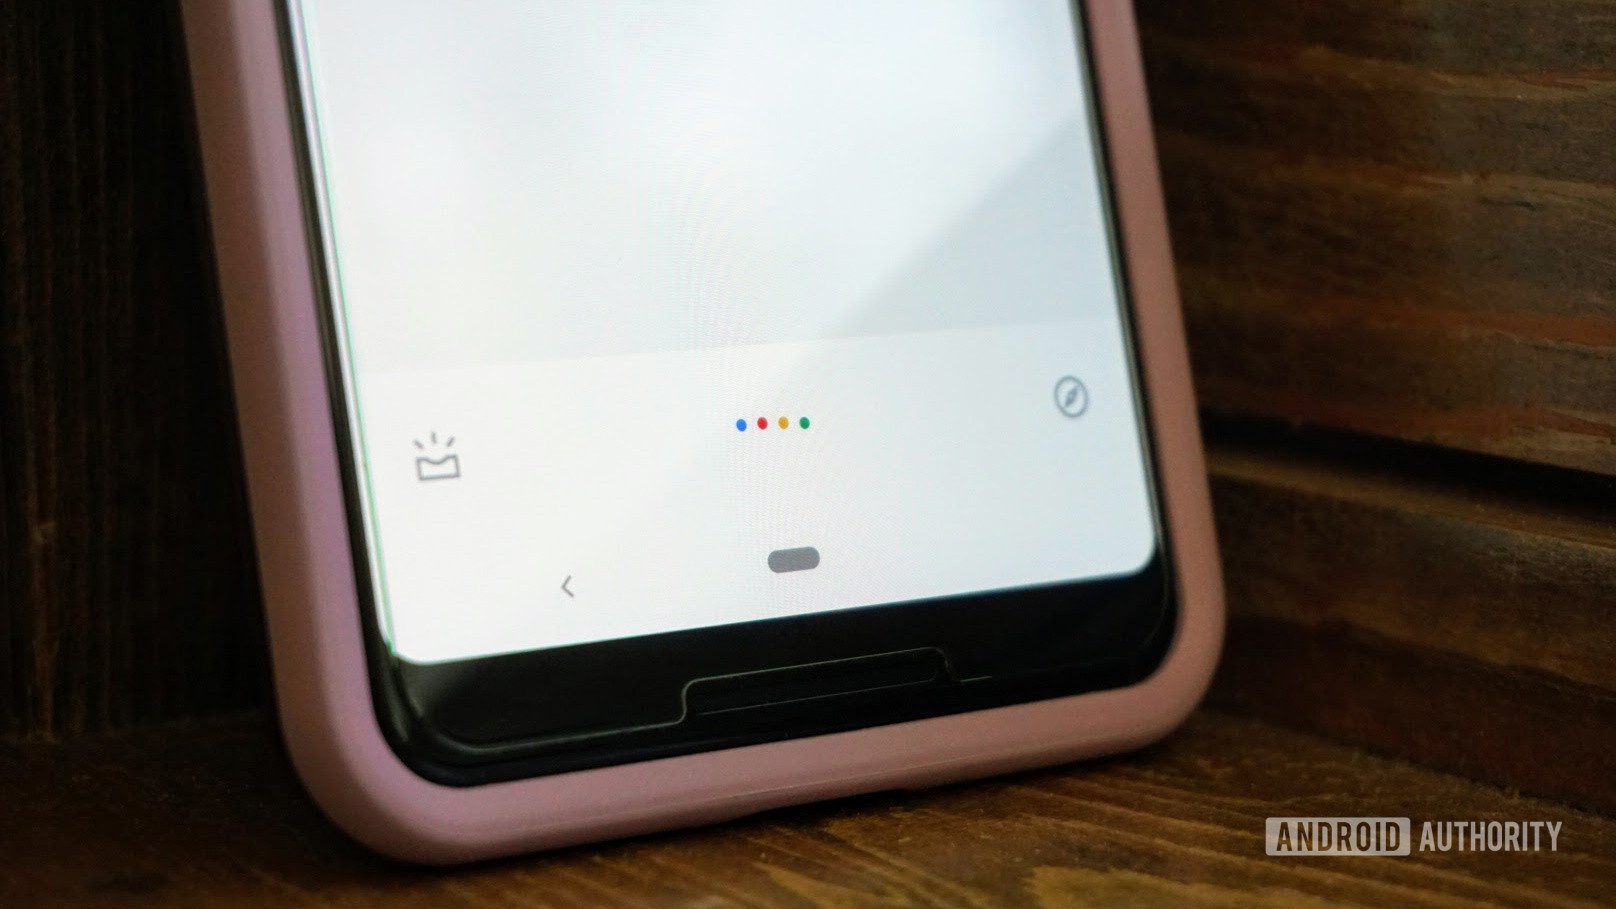 Google Assistant prompt on the Google Pixel 3 XL